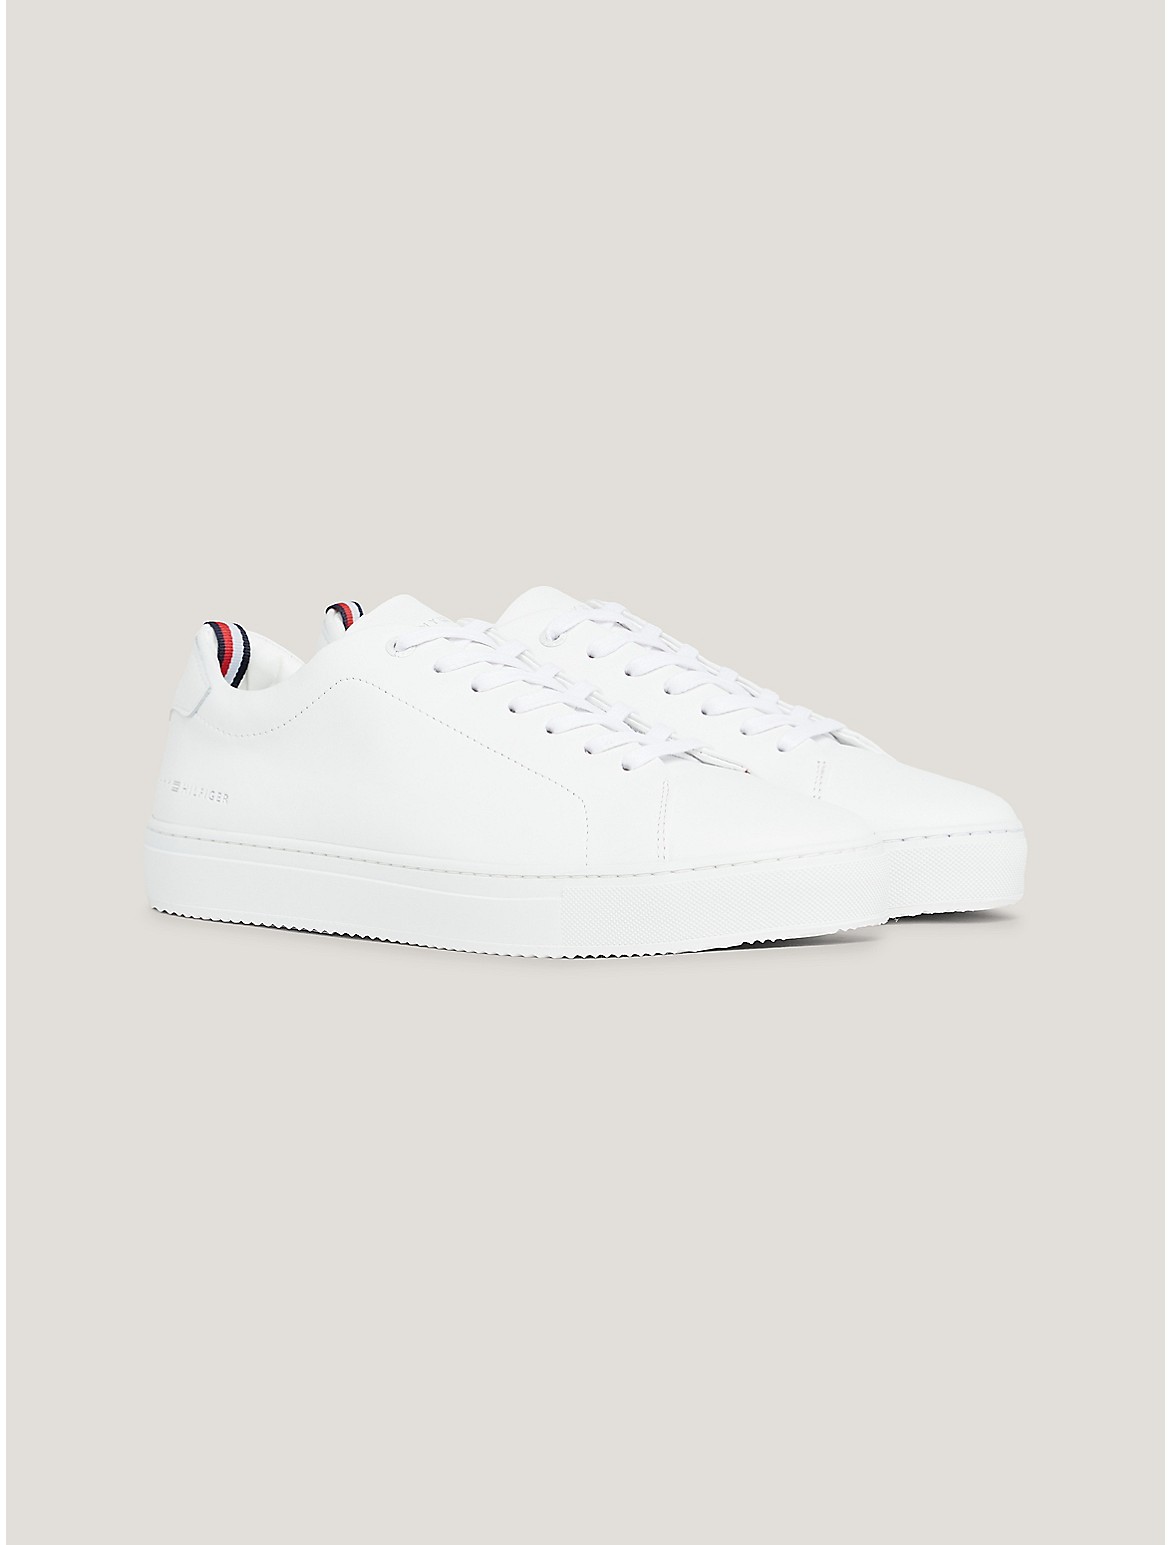 Tommy Hilfiger Men's Leather Cupsole Sneaker - White - 12